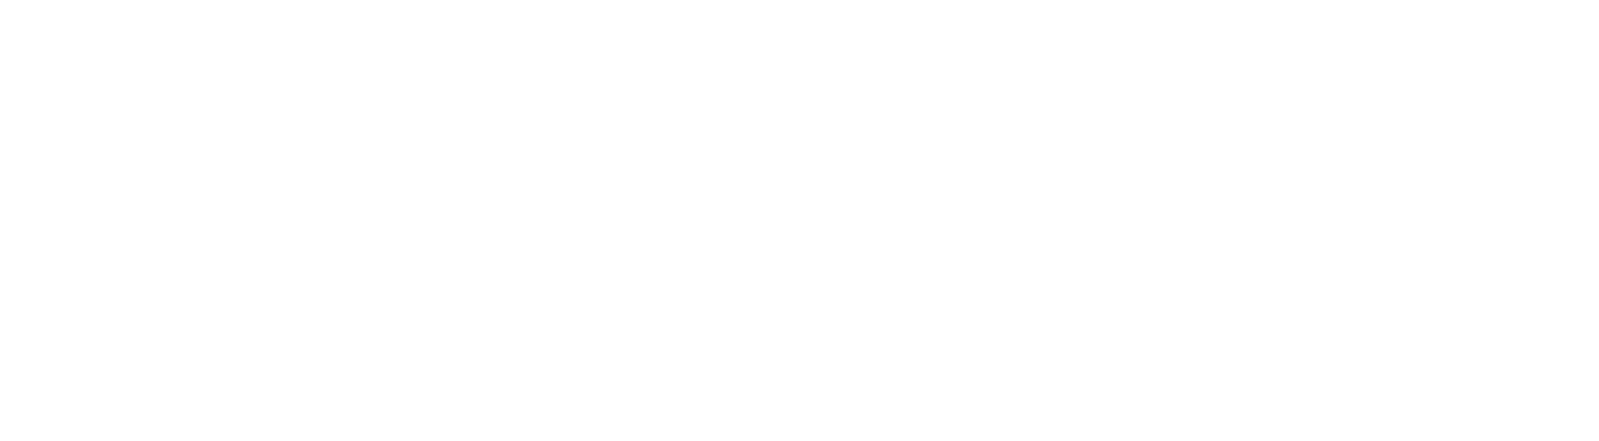 United Therapeutics logo large for dark backgrounds (transparent PNG)